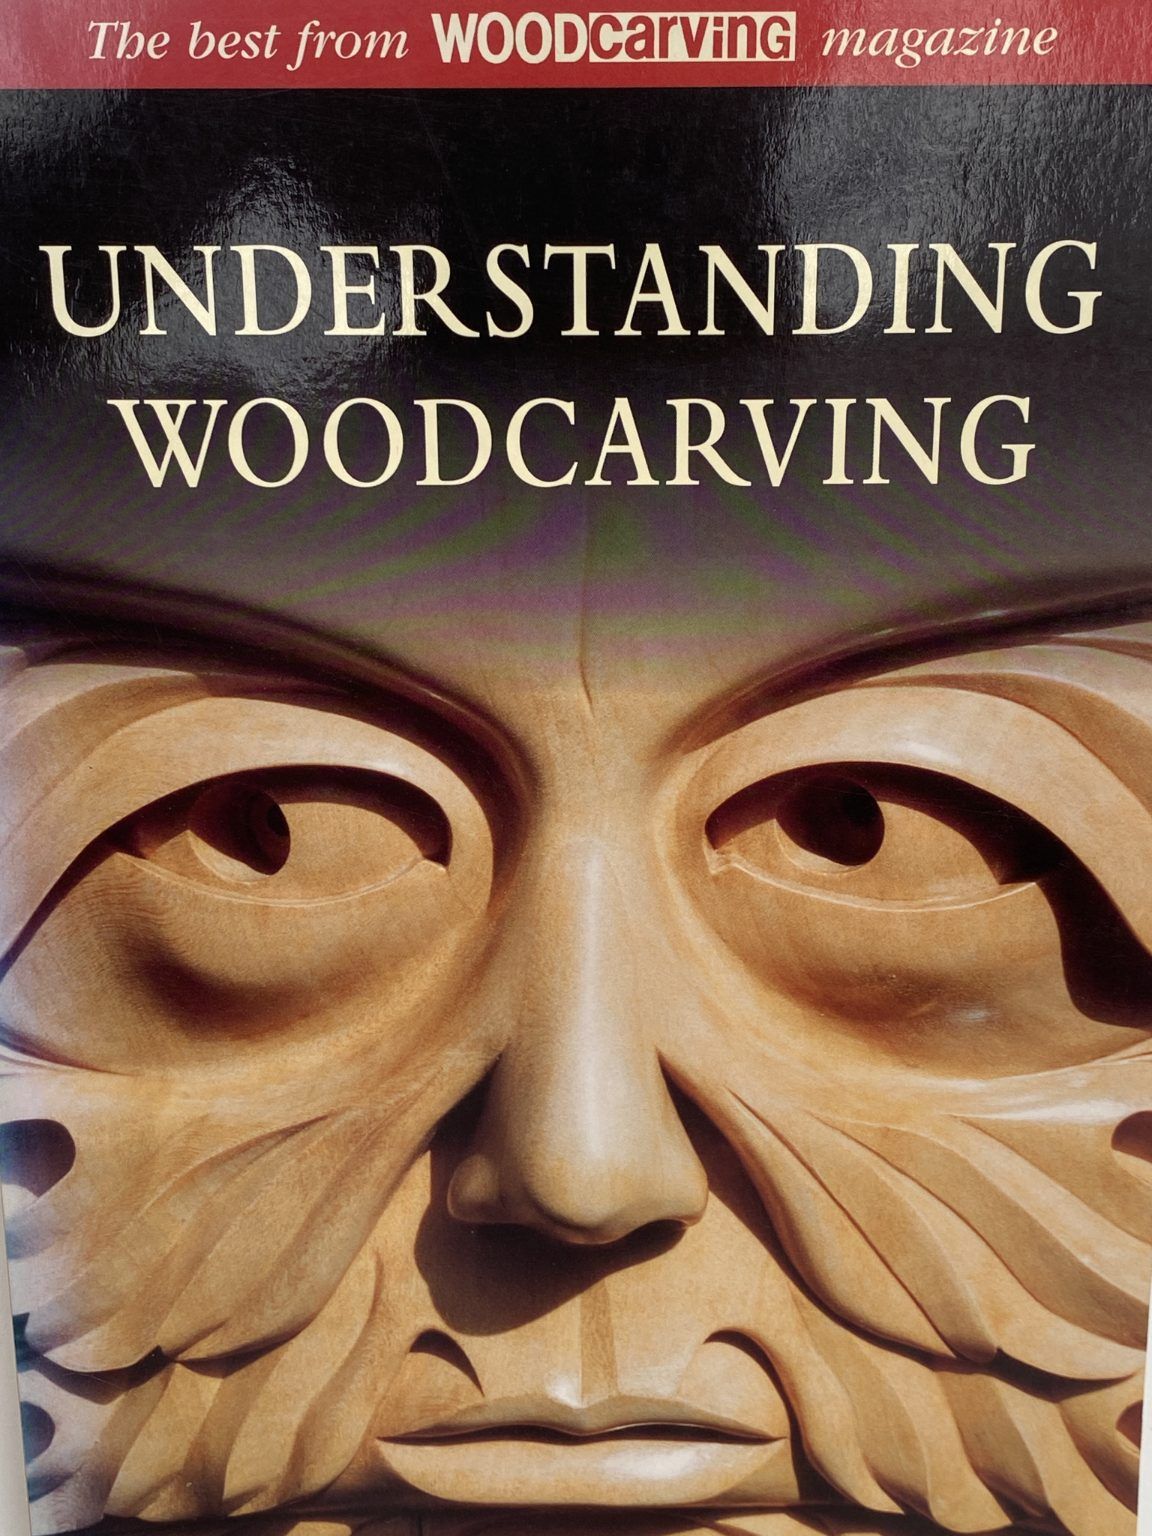 UNDERSTANDING WOODCARVING: The Best From Woodcarving Magazine